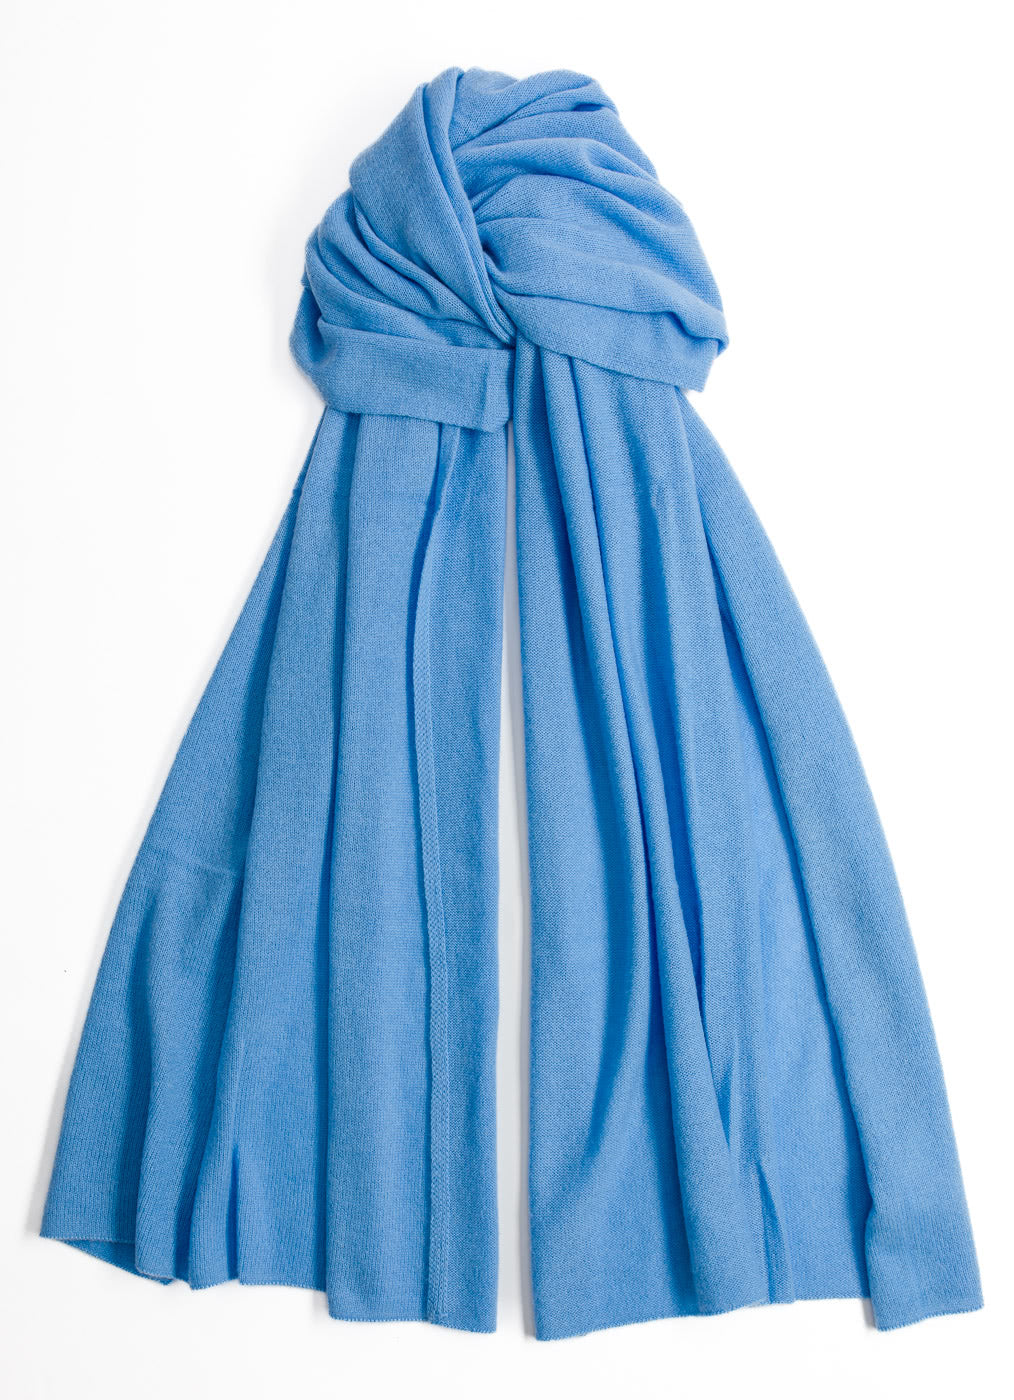 Large Scarf made of 100% pure Cashmere